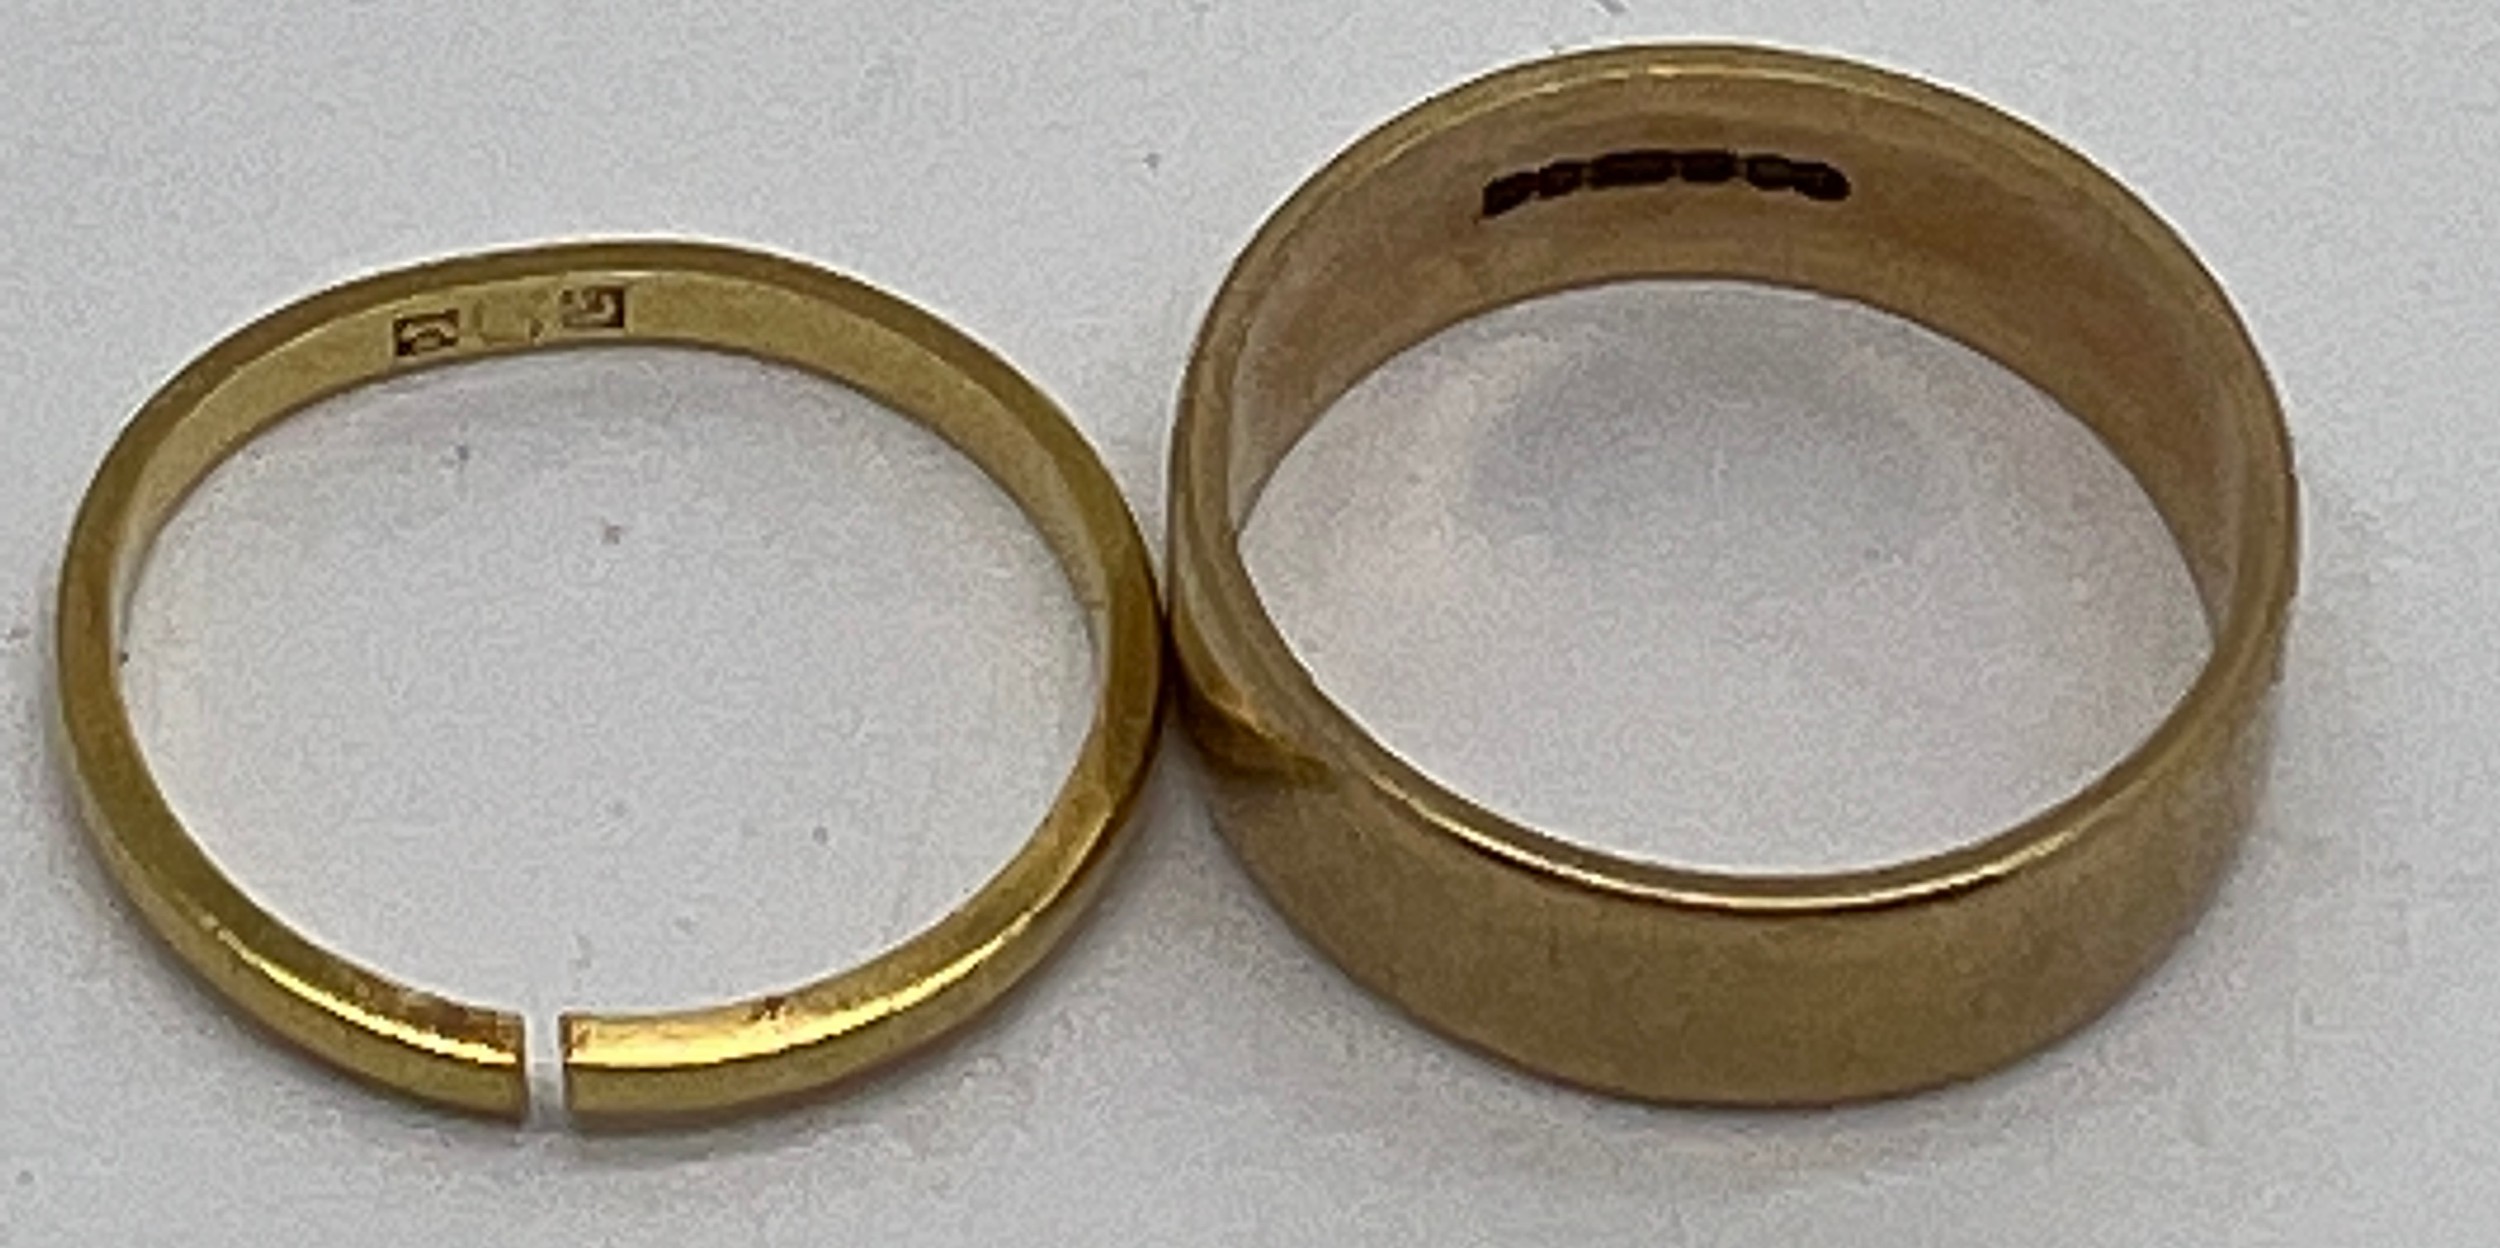 Two gold wedding bands, one 9 carat gold 3.1gm, the other 18 carat 1.6gm.